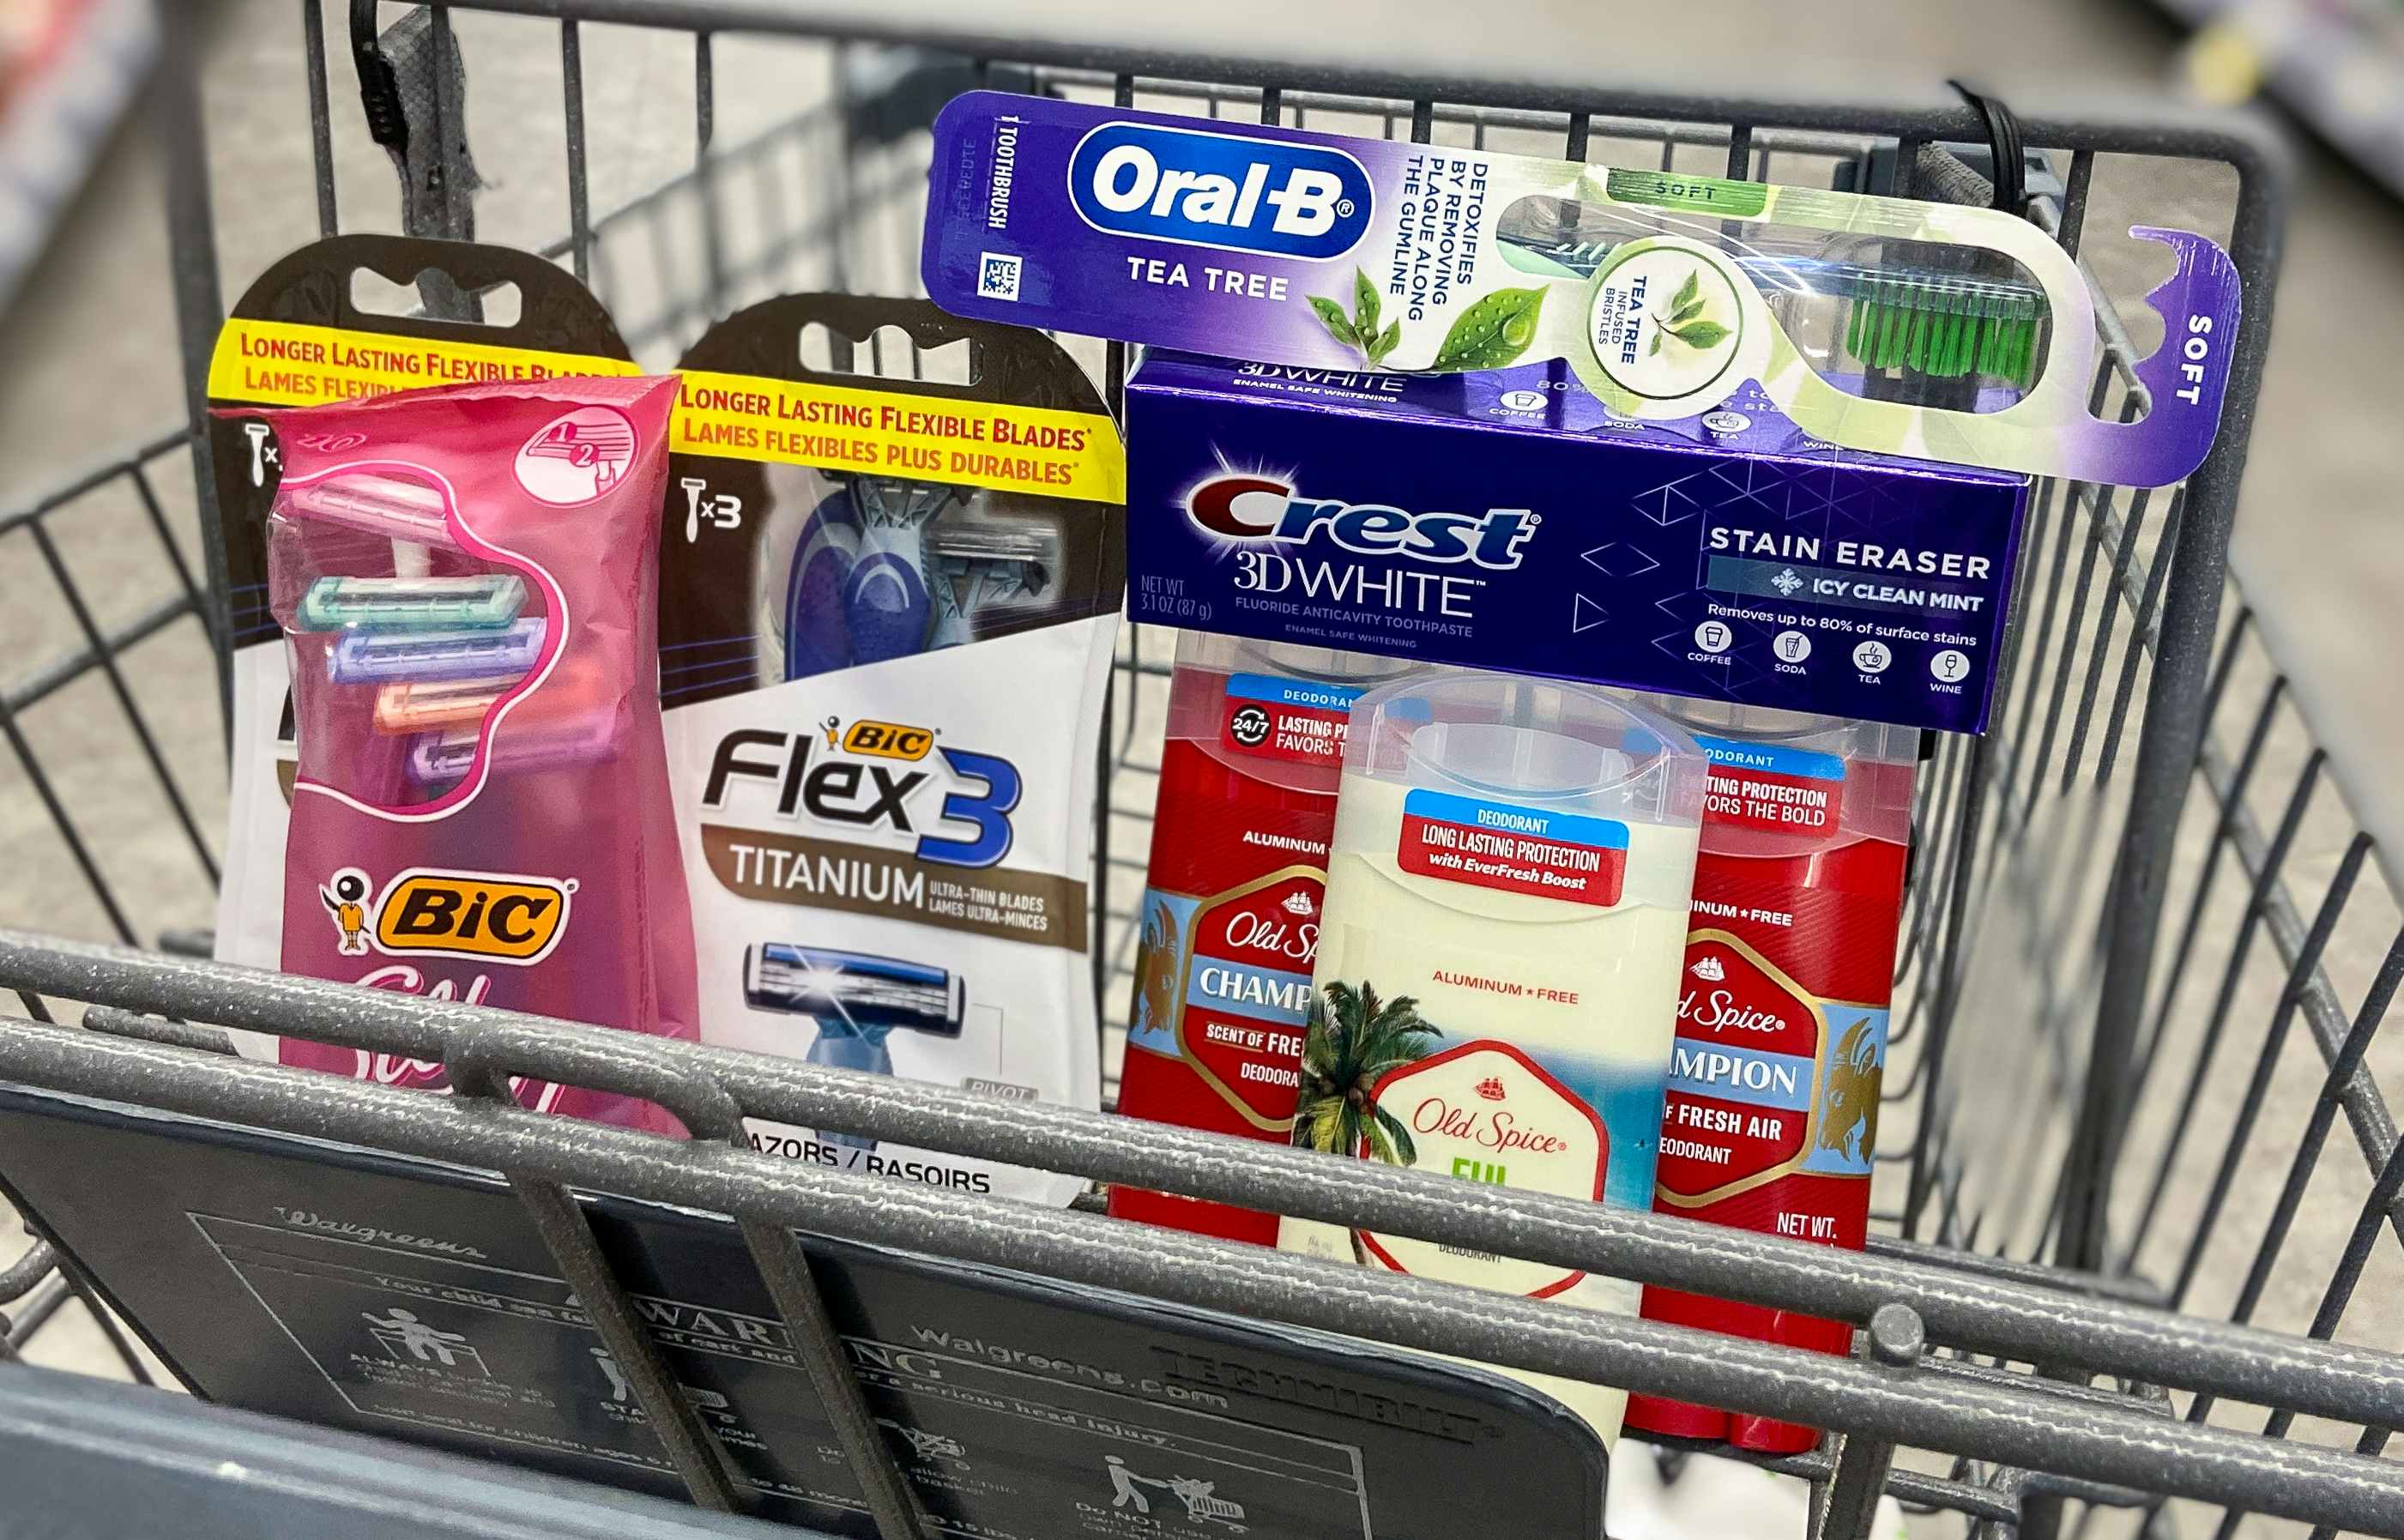 a walgreens cart with bic disposable razors, old spice deodorant, crest toothpaste, and an oral-b toothbrush